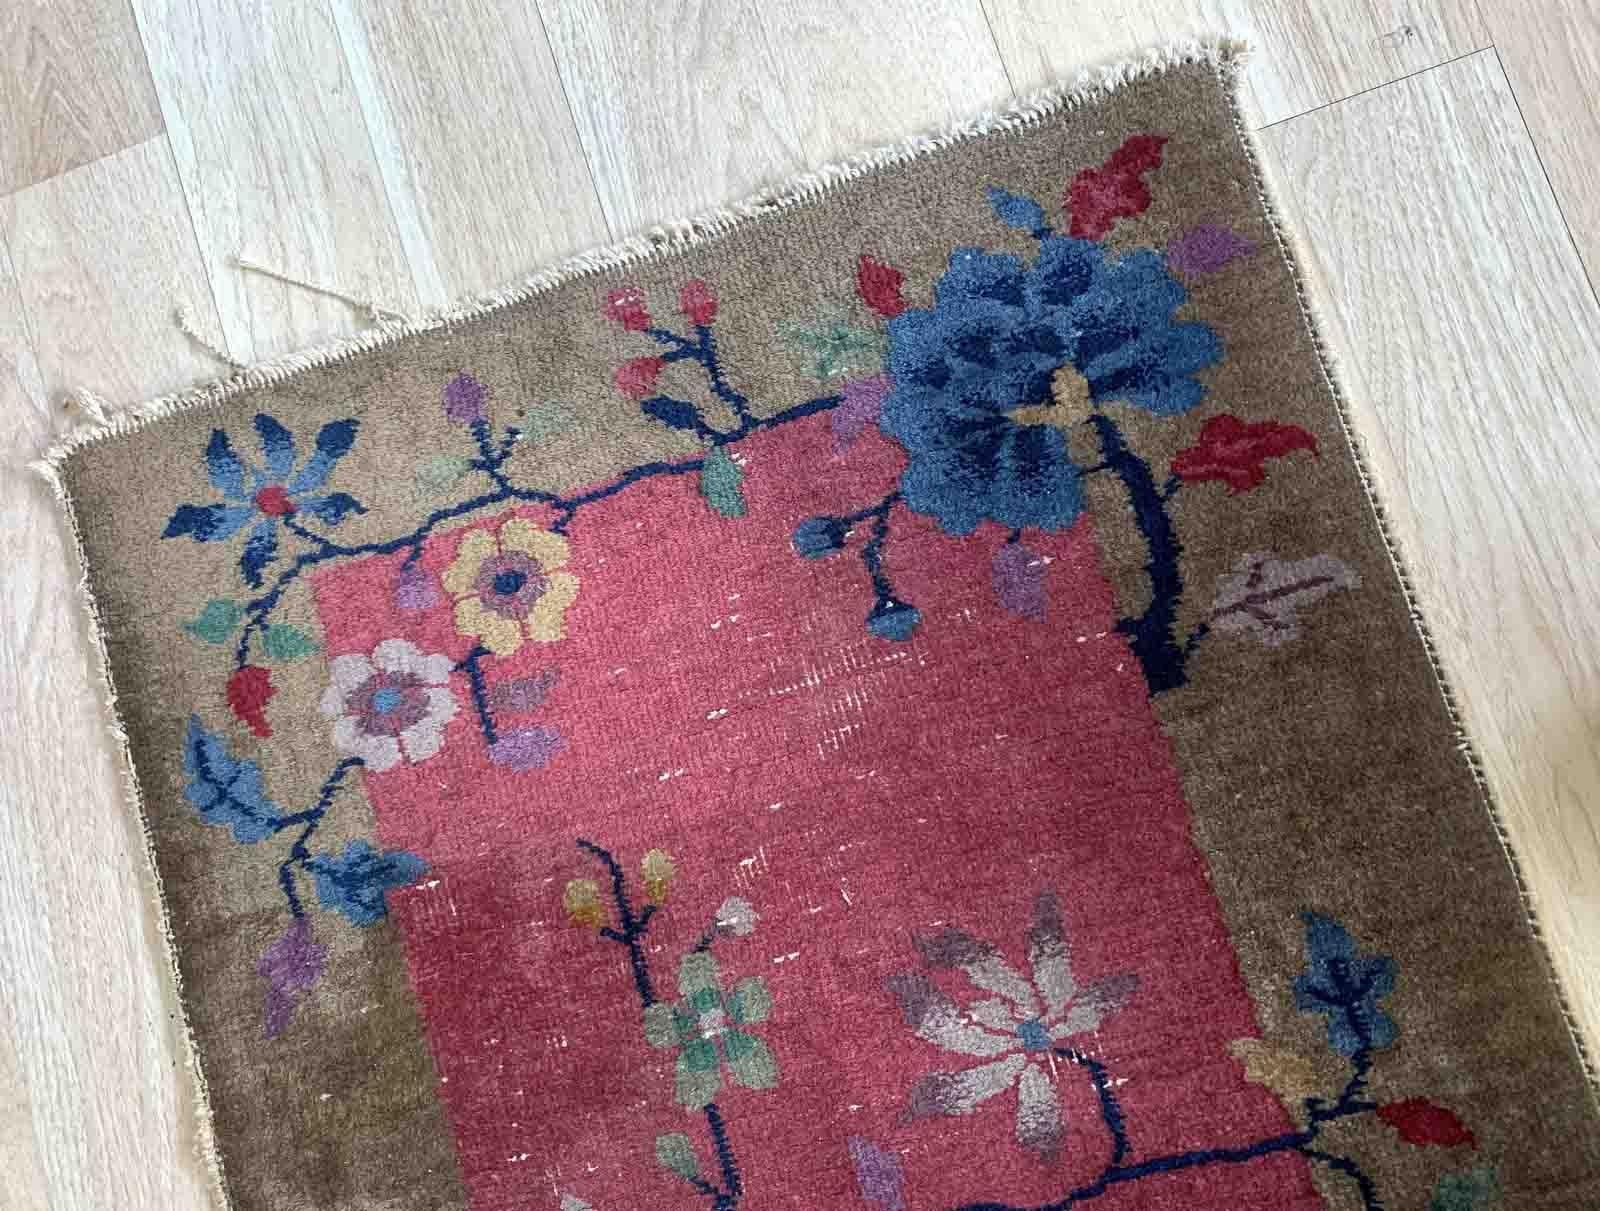 This exquisite Art Deco Chinese rug from the 1920s is a true masterpiece of craftsmanship. It is entirely handmade with meticulous attention to detail, using high-quality wool as the primary material. The rug measures 2.1 feet in width and 4.2 feet